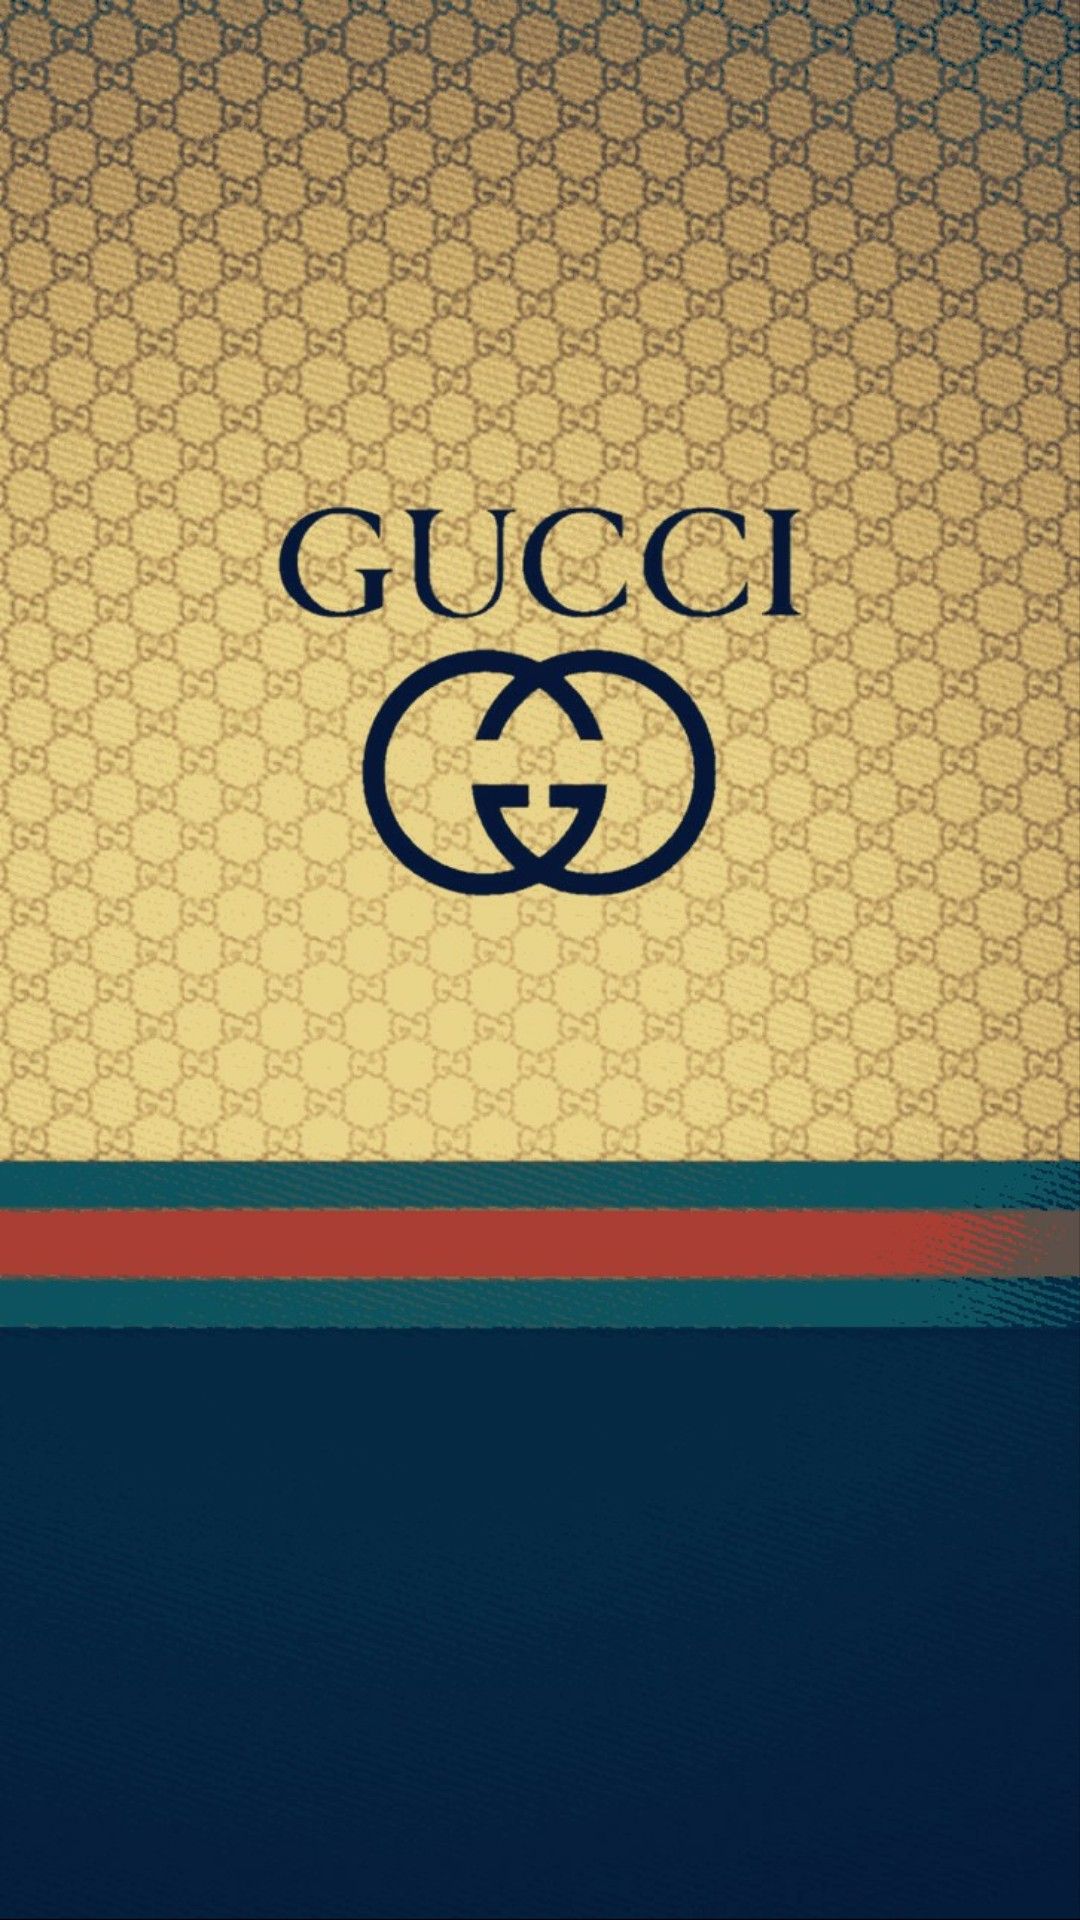 Destiny Ward On Gucci In Wallpaper iPhone